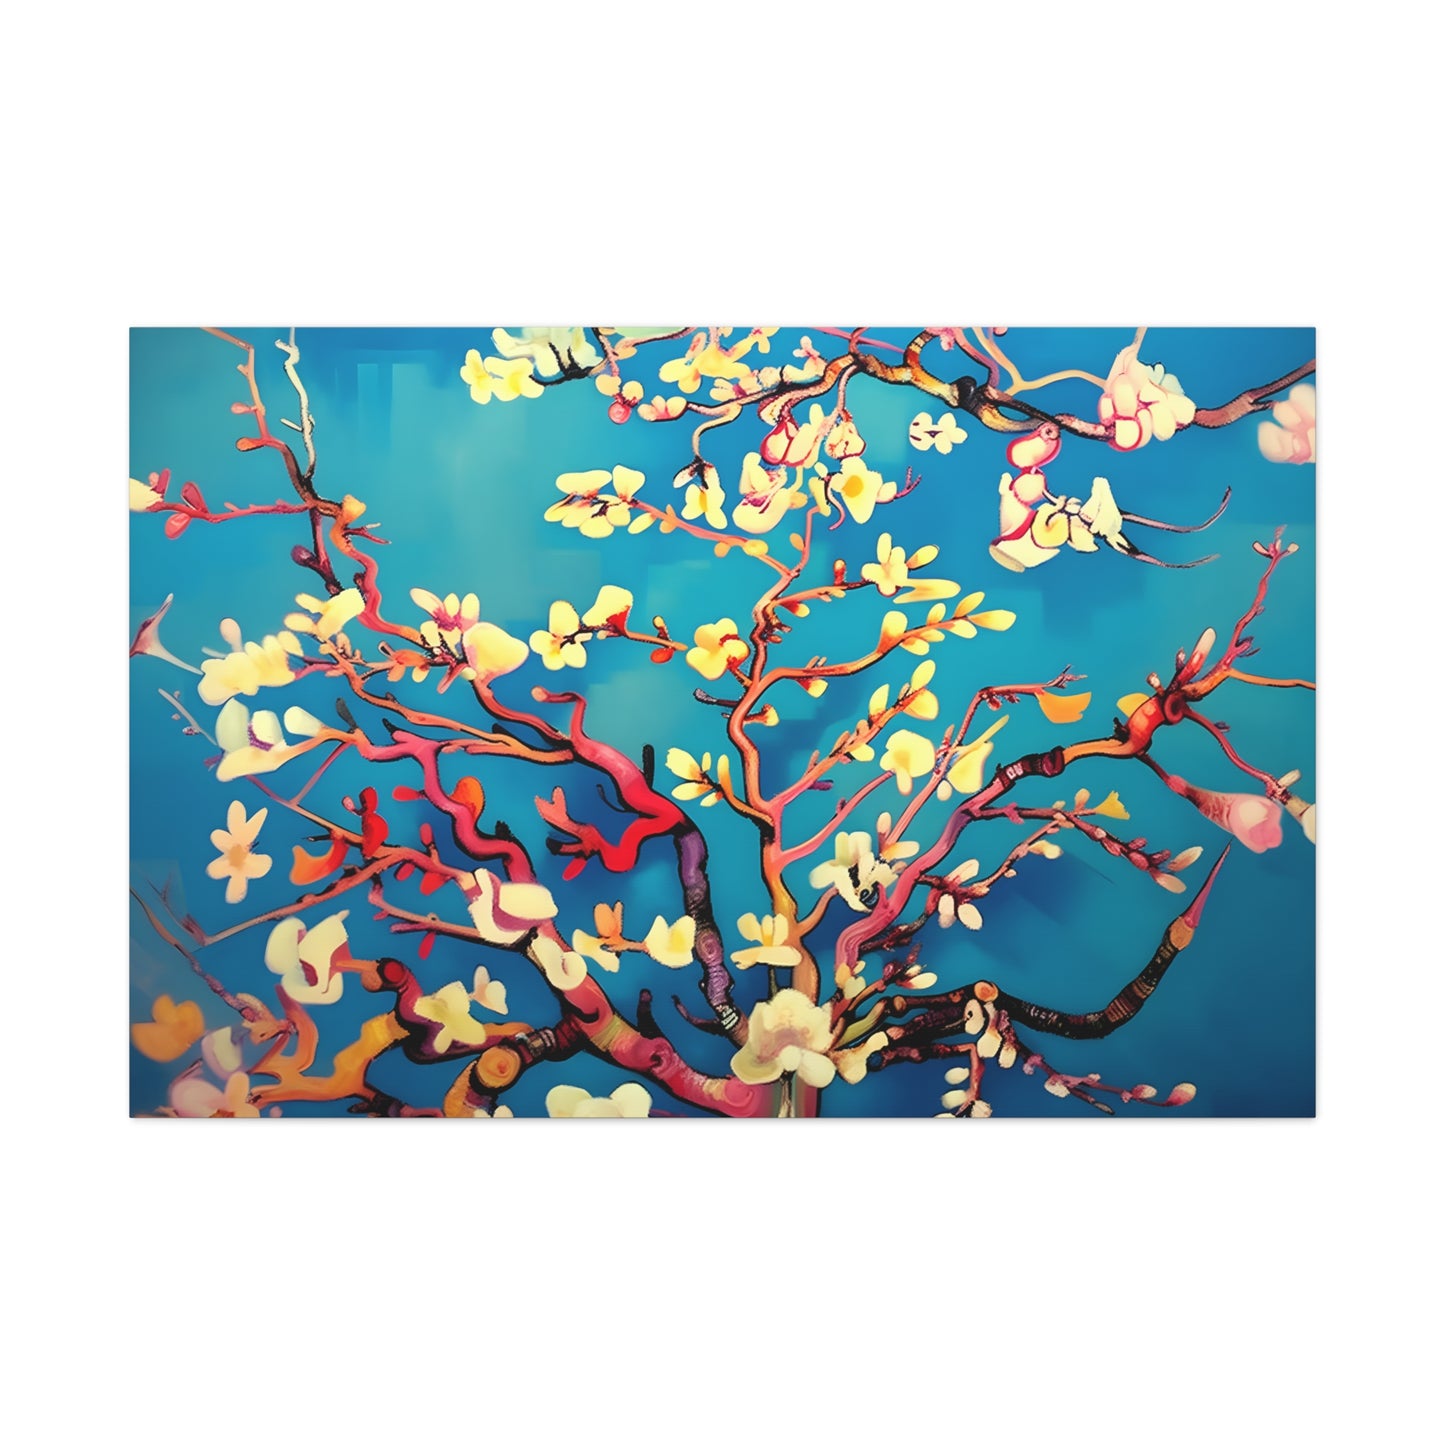 Branches With Almond Blossoms 2.0